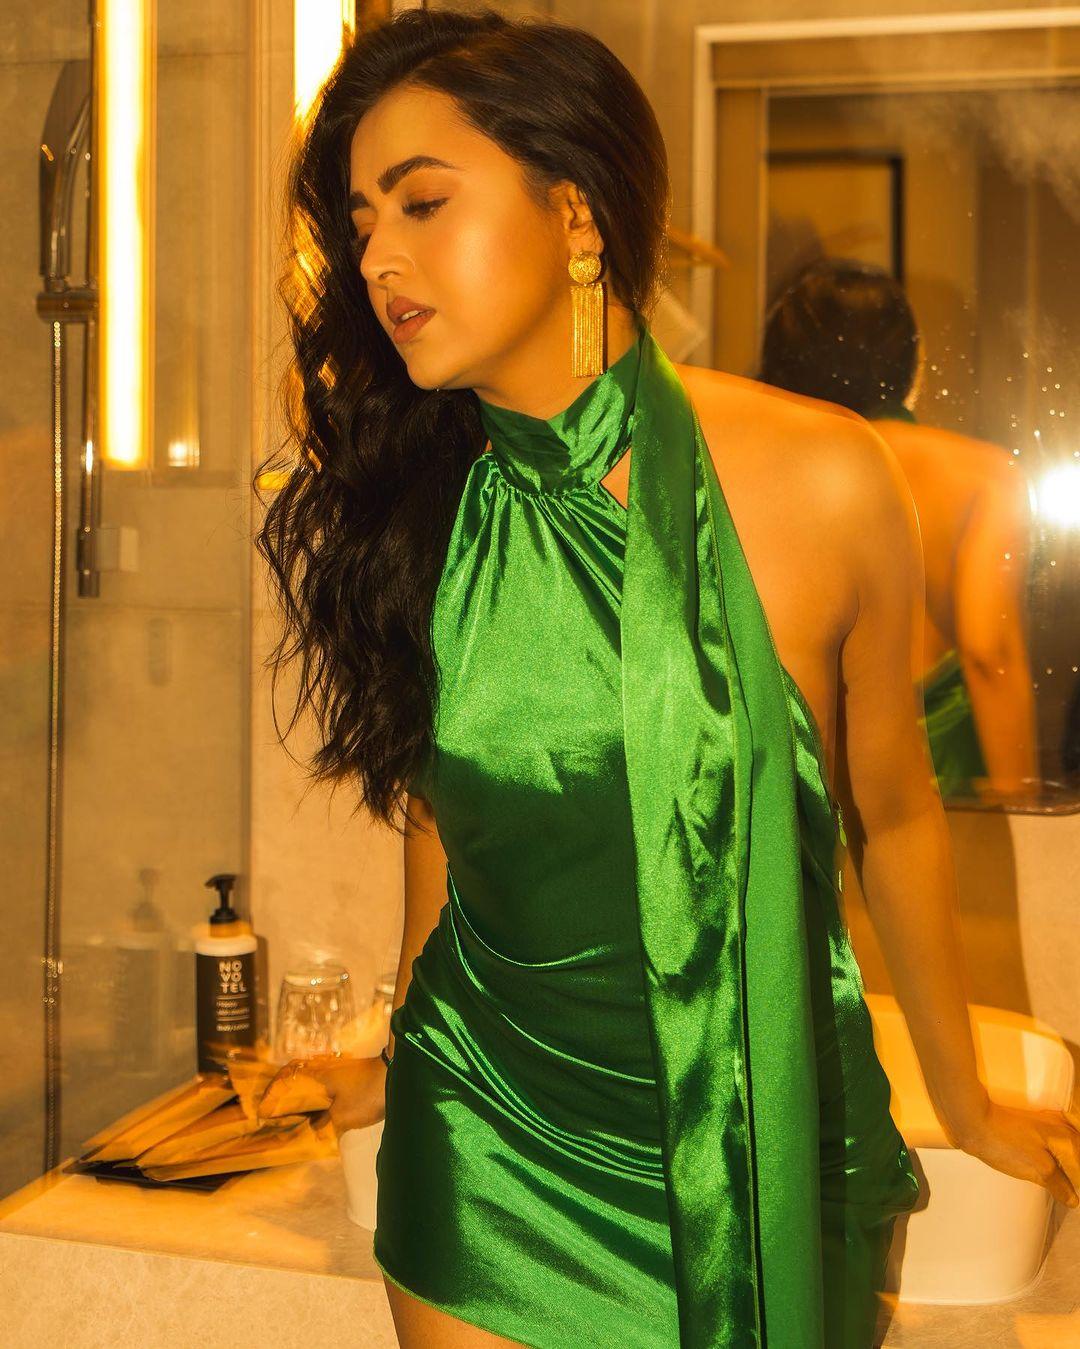 Tejasswi chose a beautiful green satin backless dress for a photoshoot, making it a perfect outfit for Promise Day. 